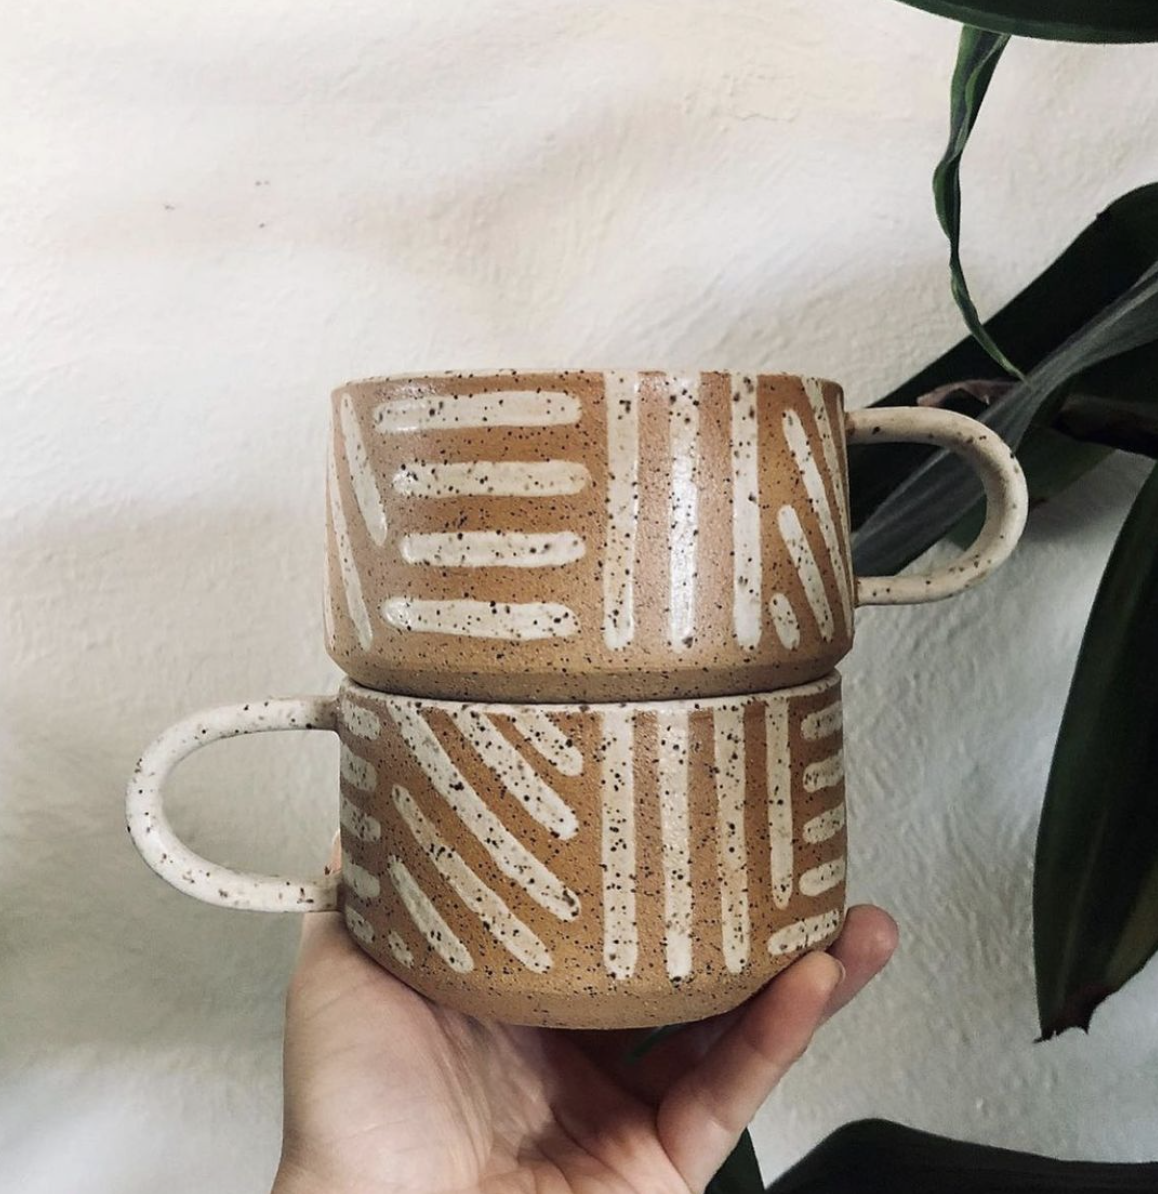 Two small mugs with round handles stacked on top of each other and held in one hand. The mugs are light brown with black speckles on them, adorned with lines of cream brush strokes going in different directions. The mugs are held up against a white textured wall and there is a large green plant on the left side of the frame. 